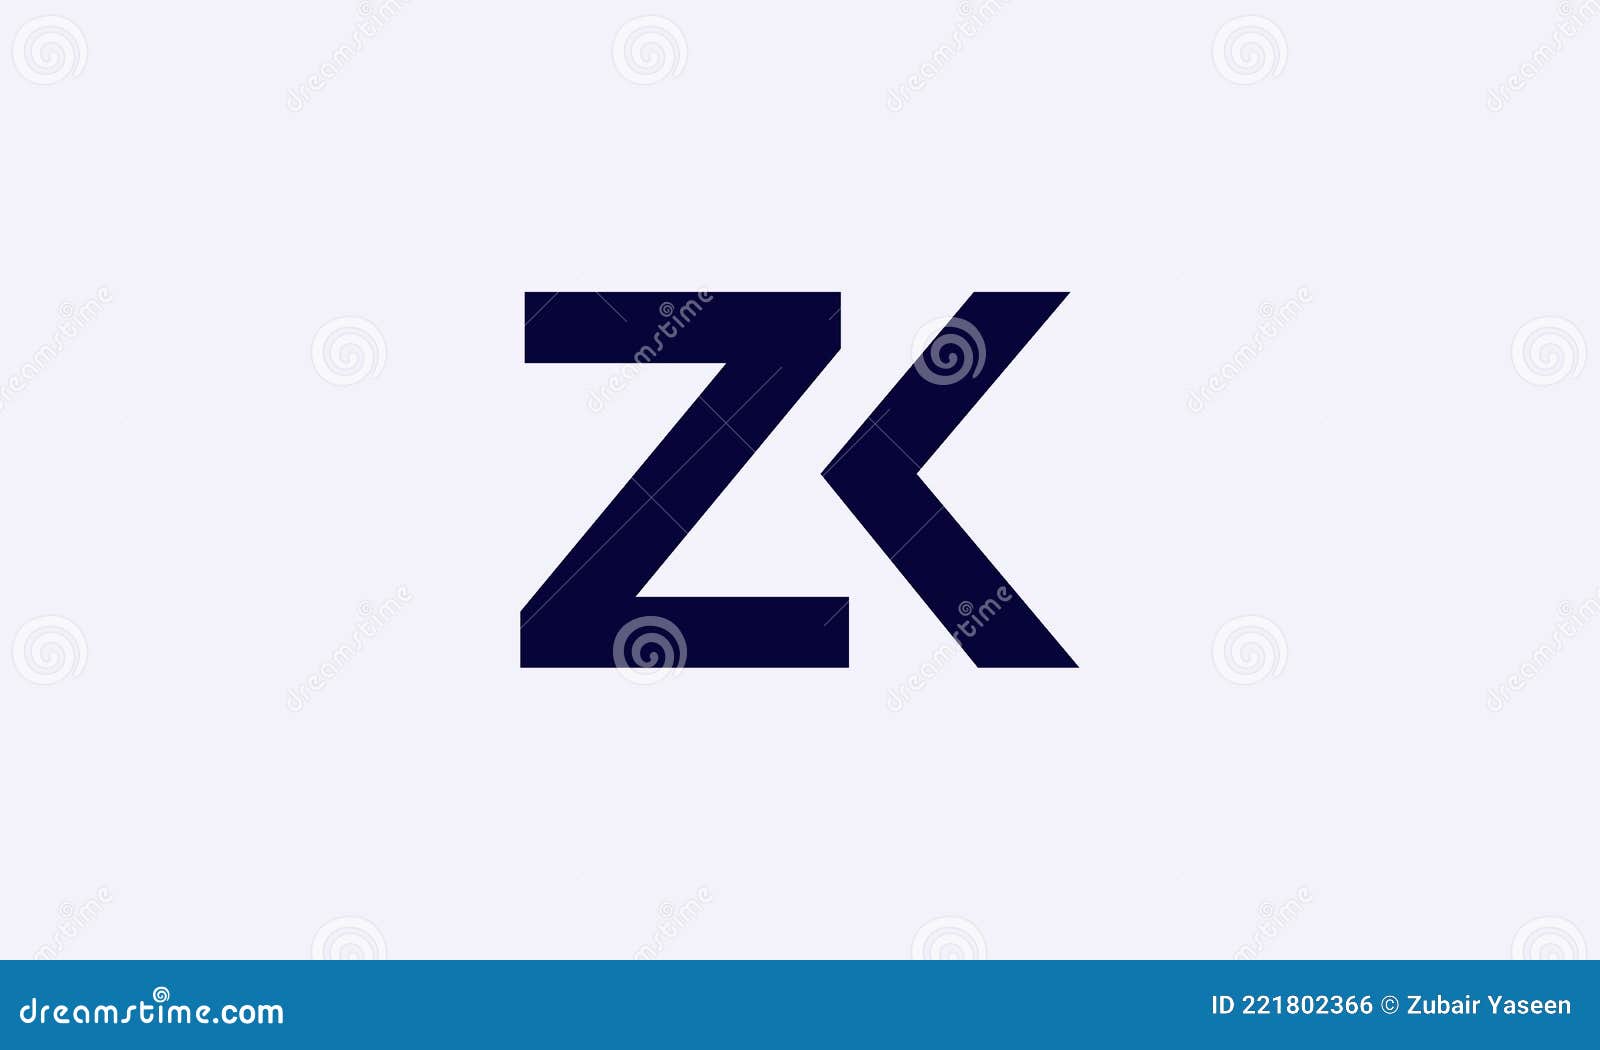 Zk And Kz Or Z And K Abstract Letter Mark Logo Template For Business Stock Vector Illustration